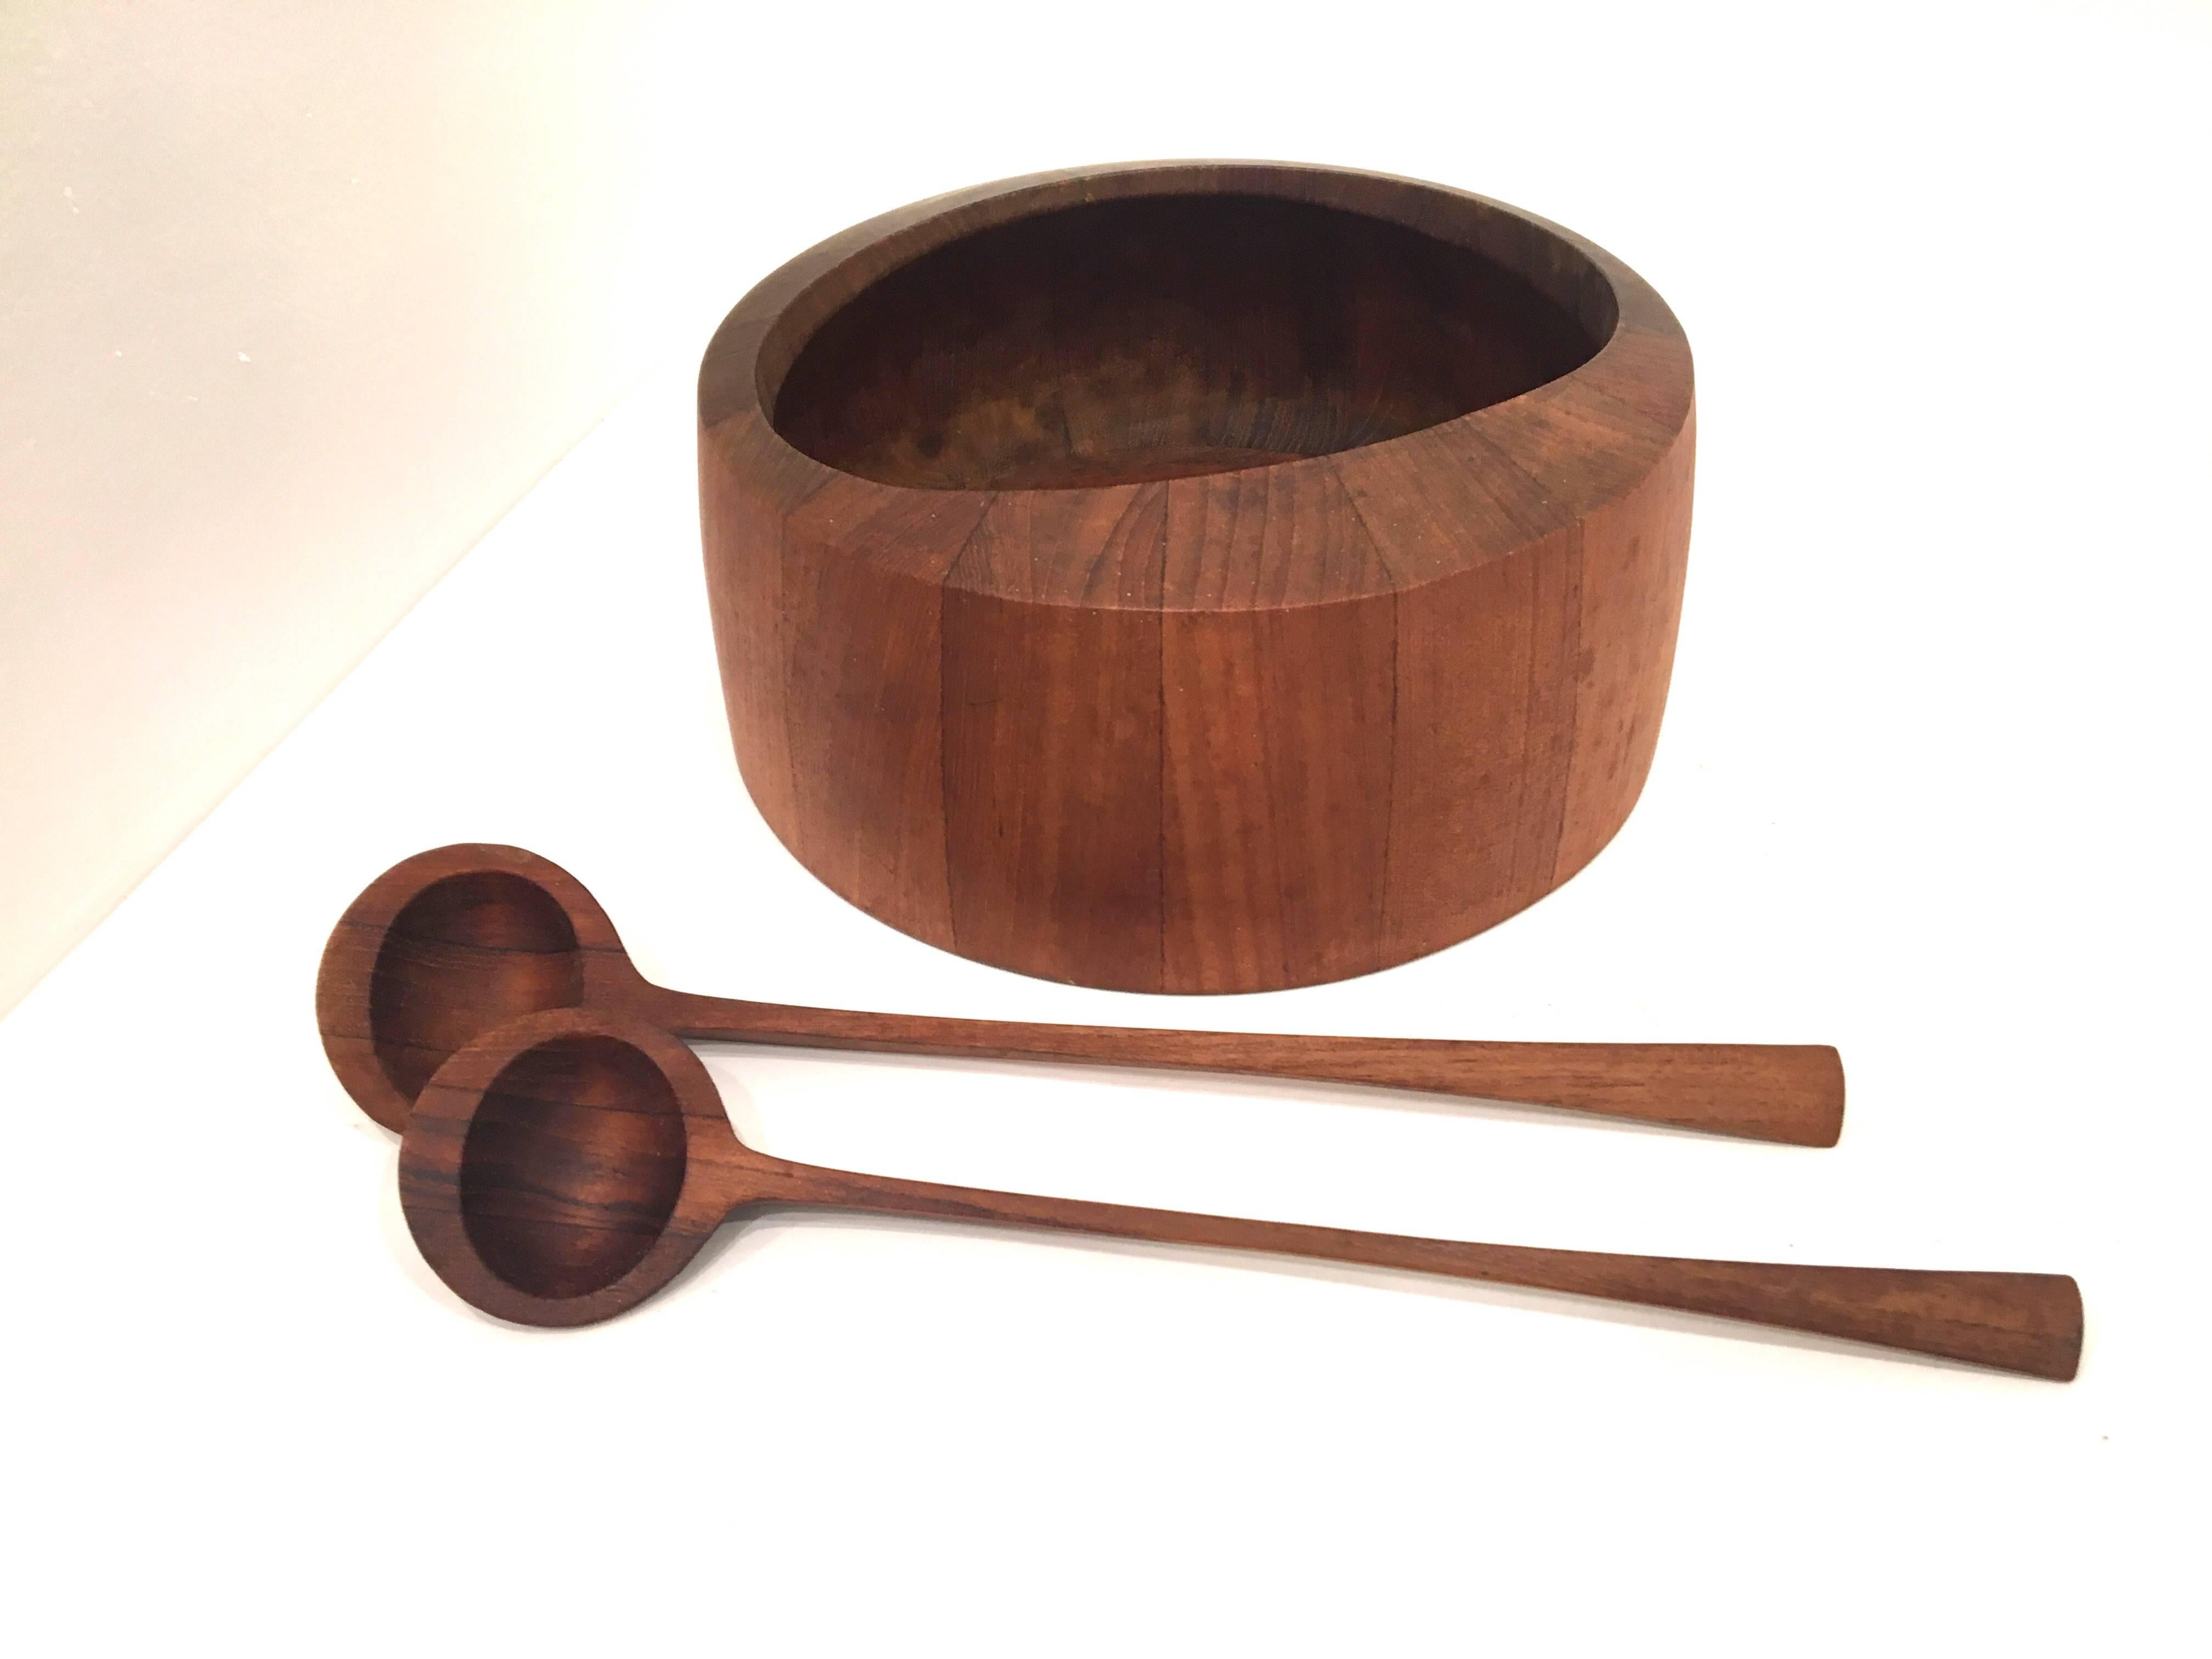 Beautiful solid staved teak bowl designed by Quistgaard for Dansk early production, with ducks logo and original servers, freshly refinished.